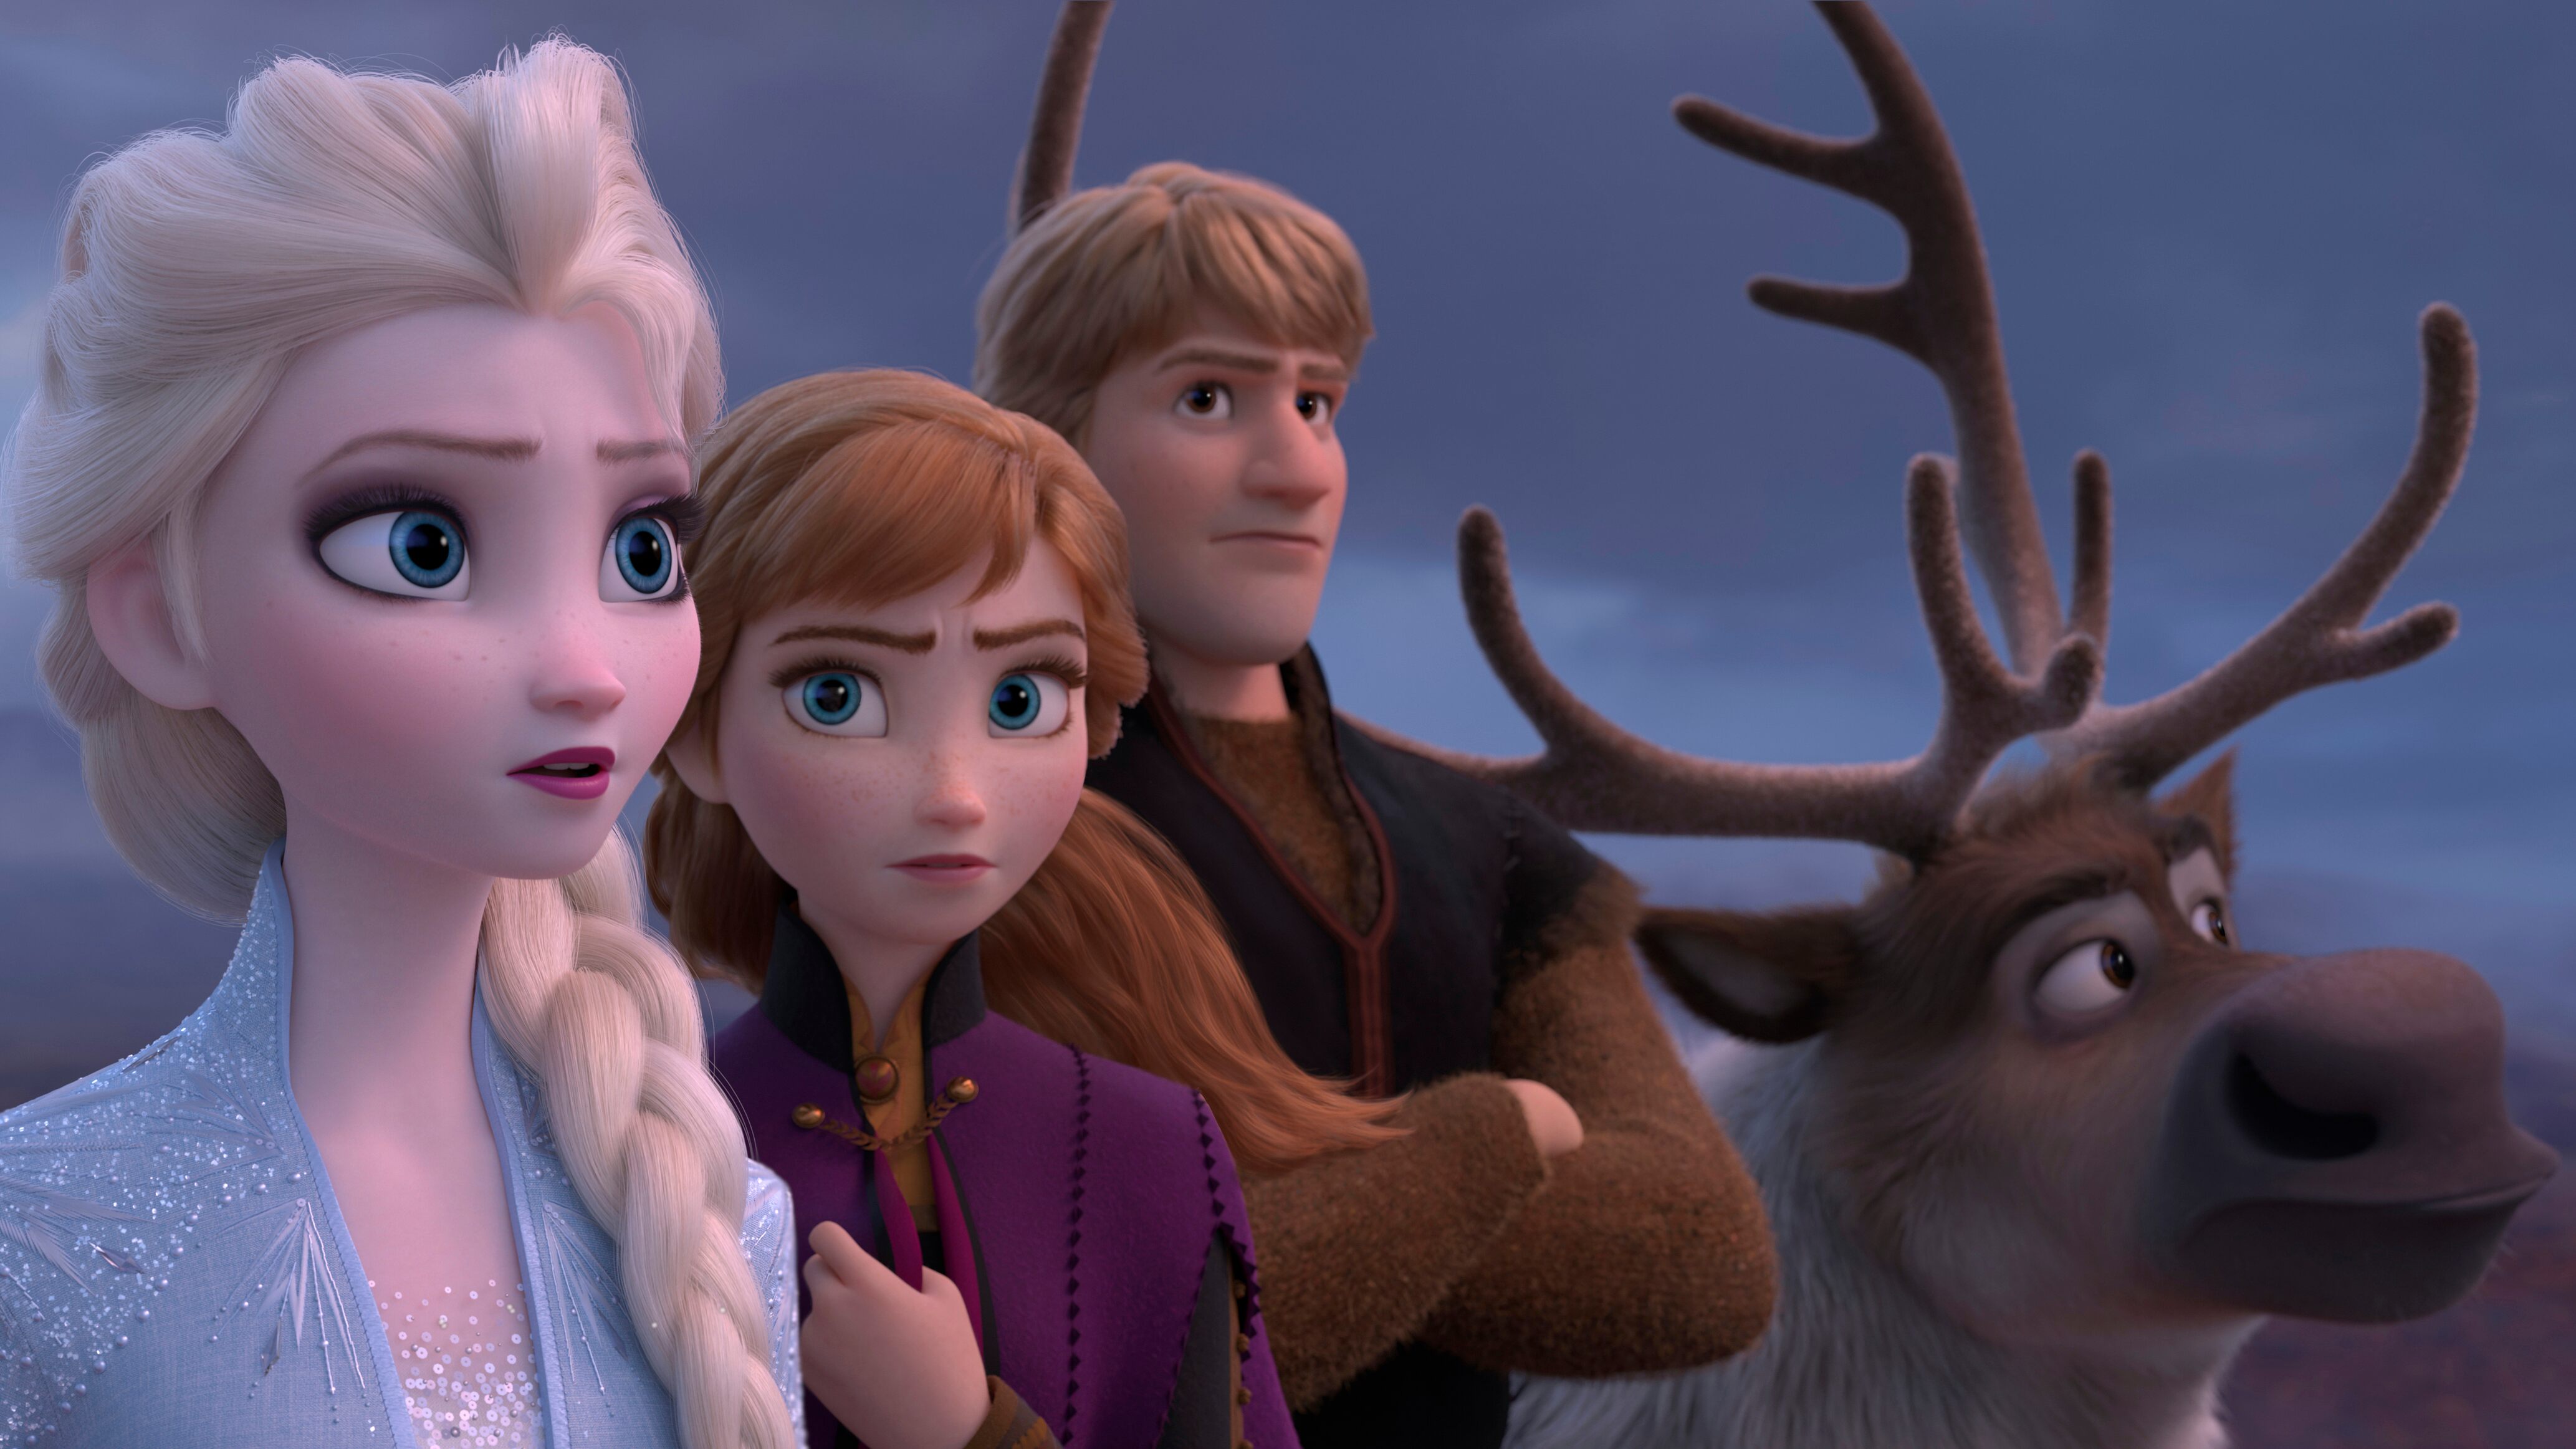 'Frozen II' sets Thanksgiving box office record